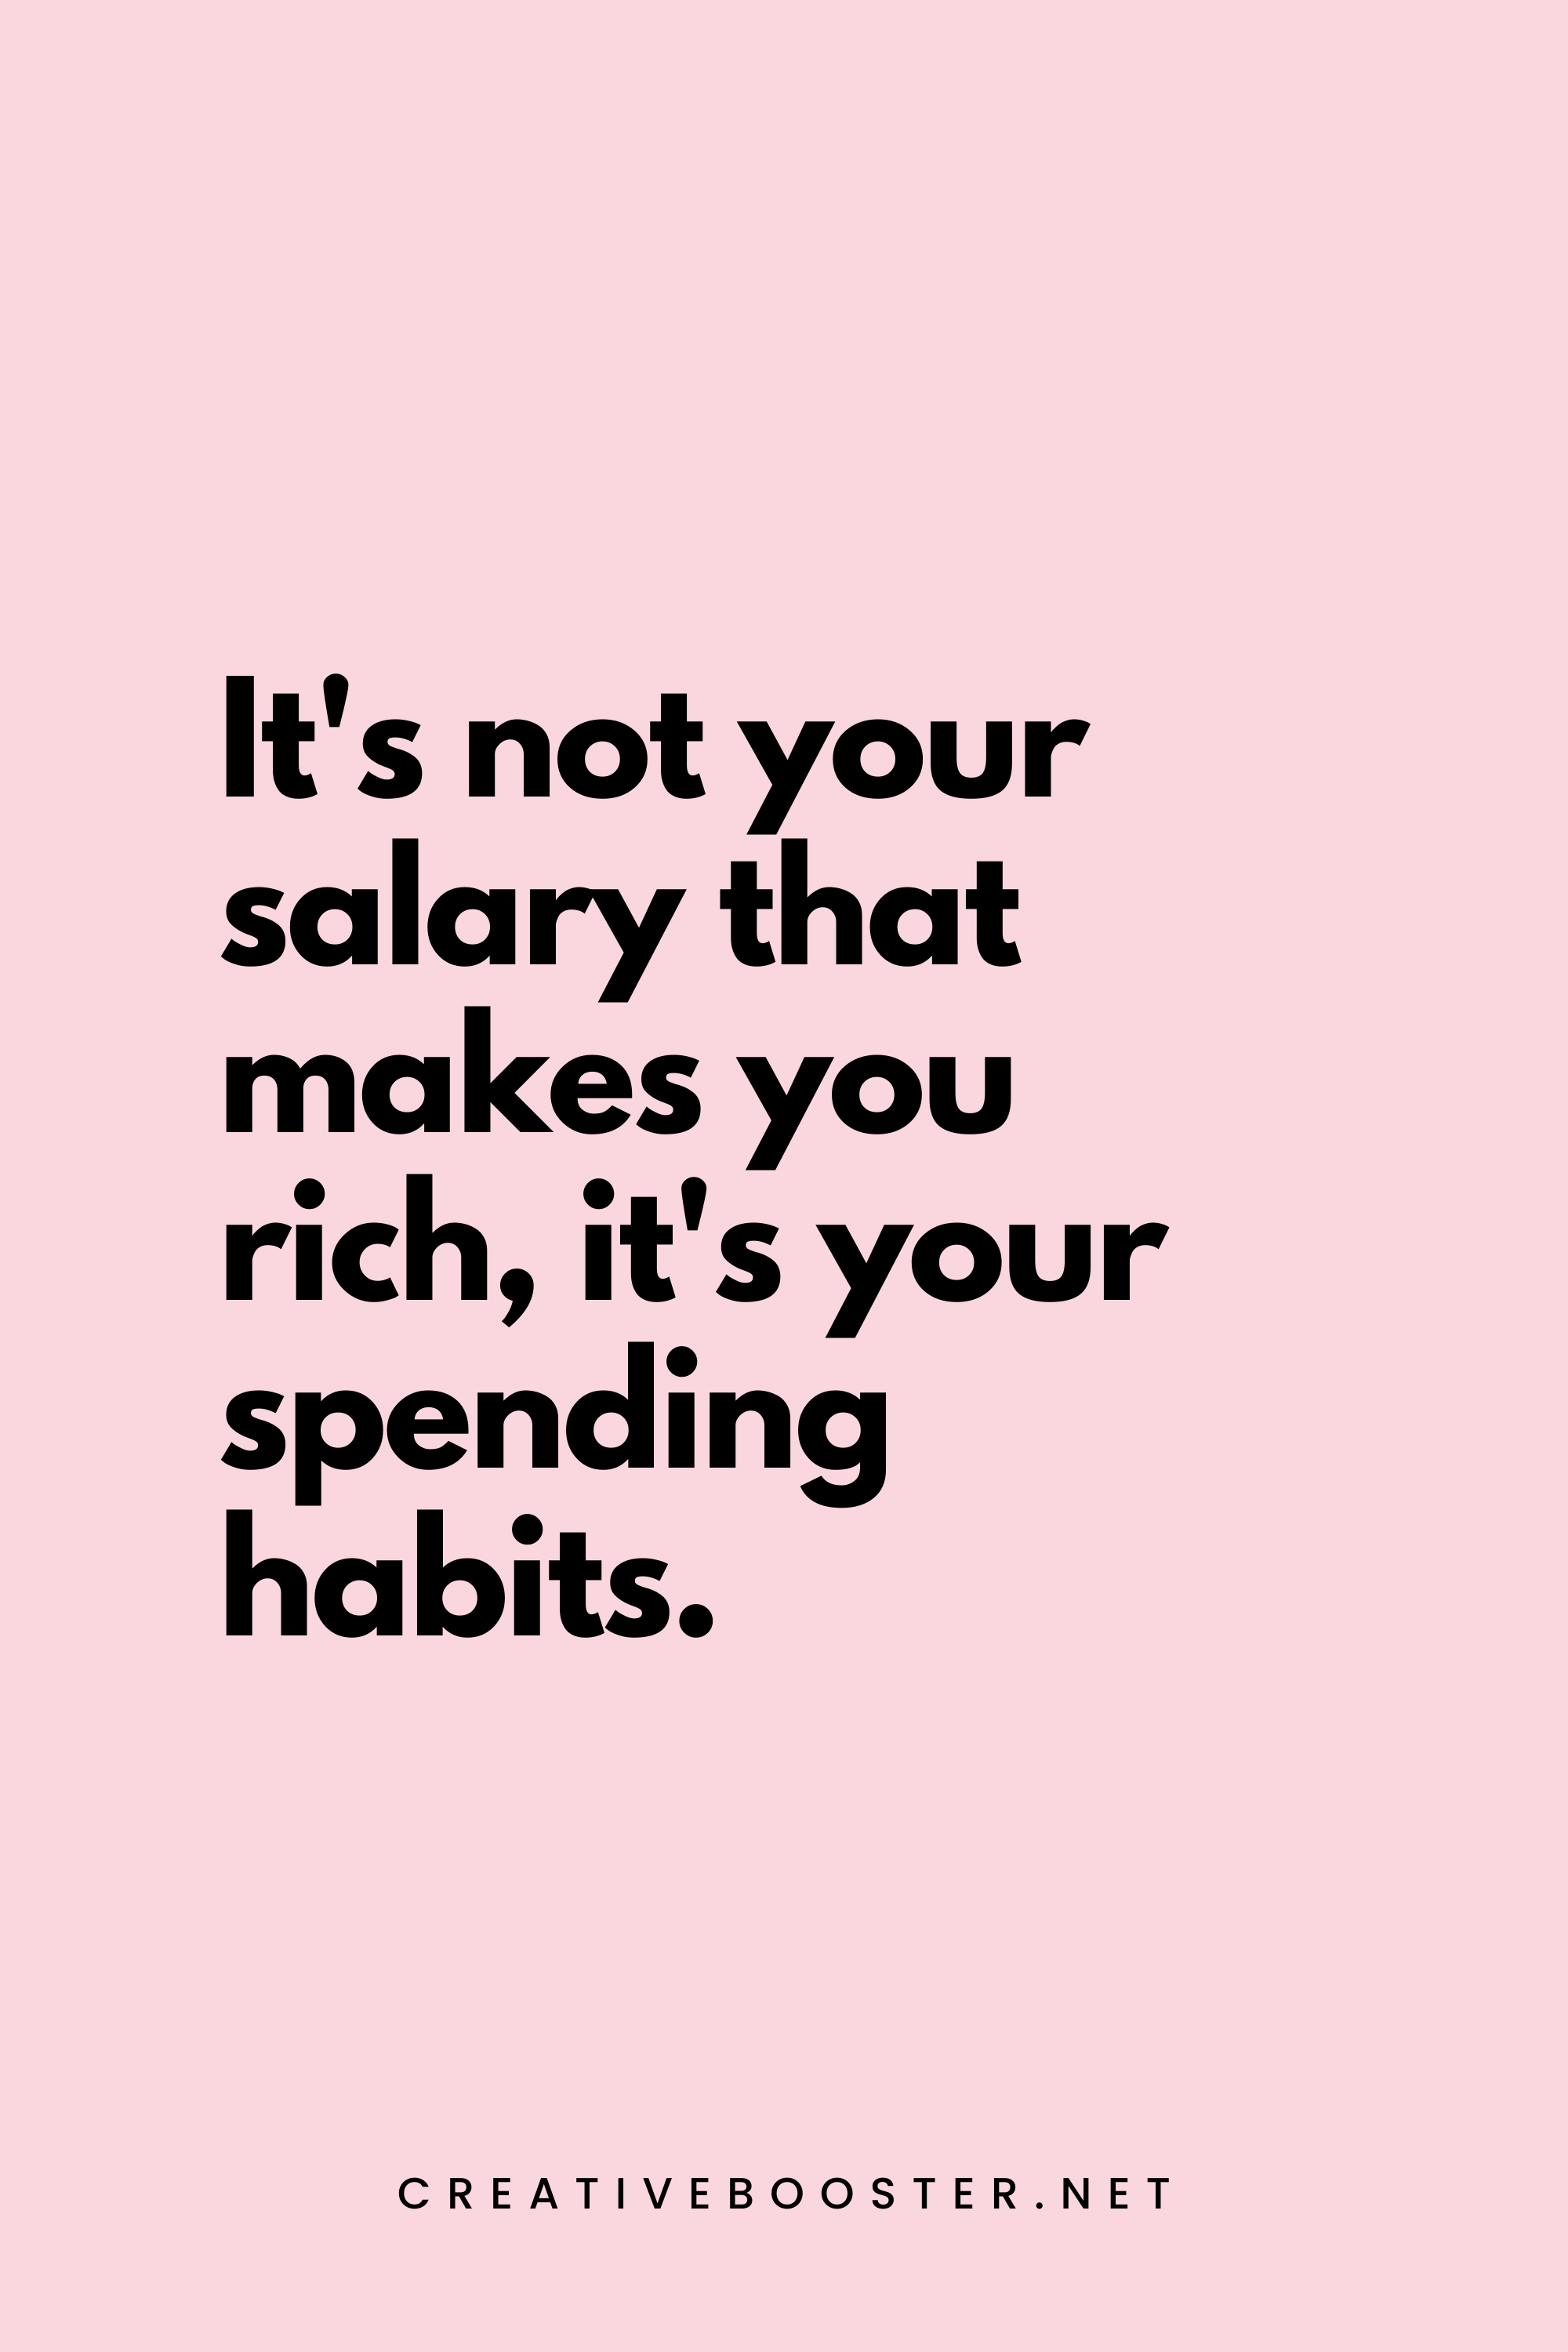 33. It's not your salary that makes you rich, it's your spending habits. - Charles A. Jaffe - 3. Financial Freedom Quotes for Students